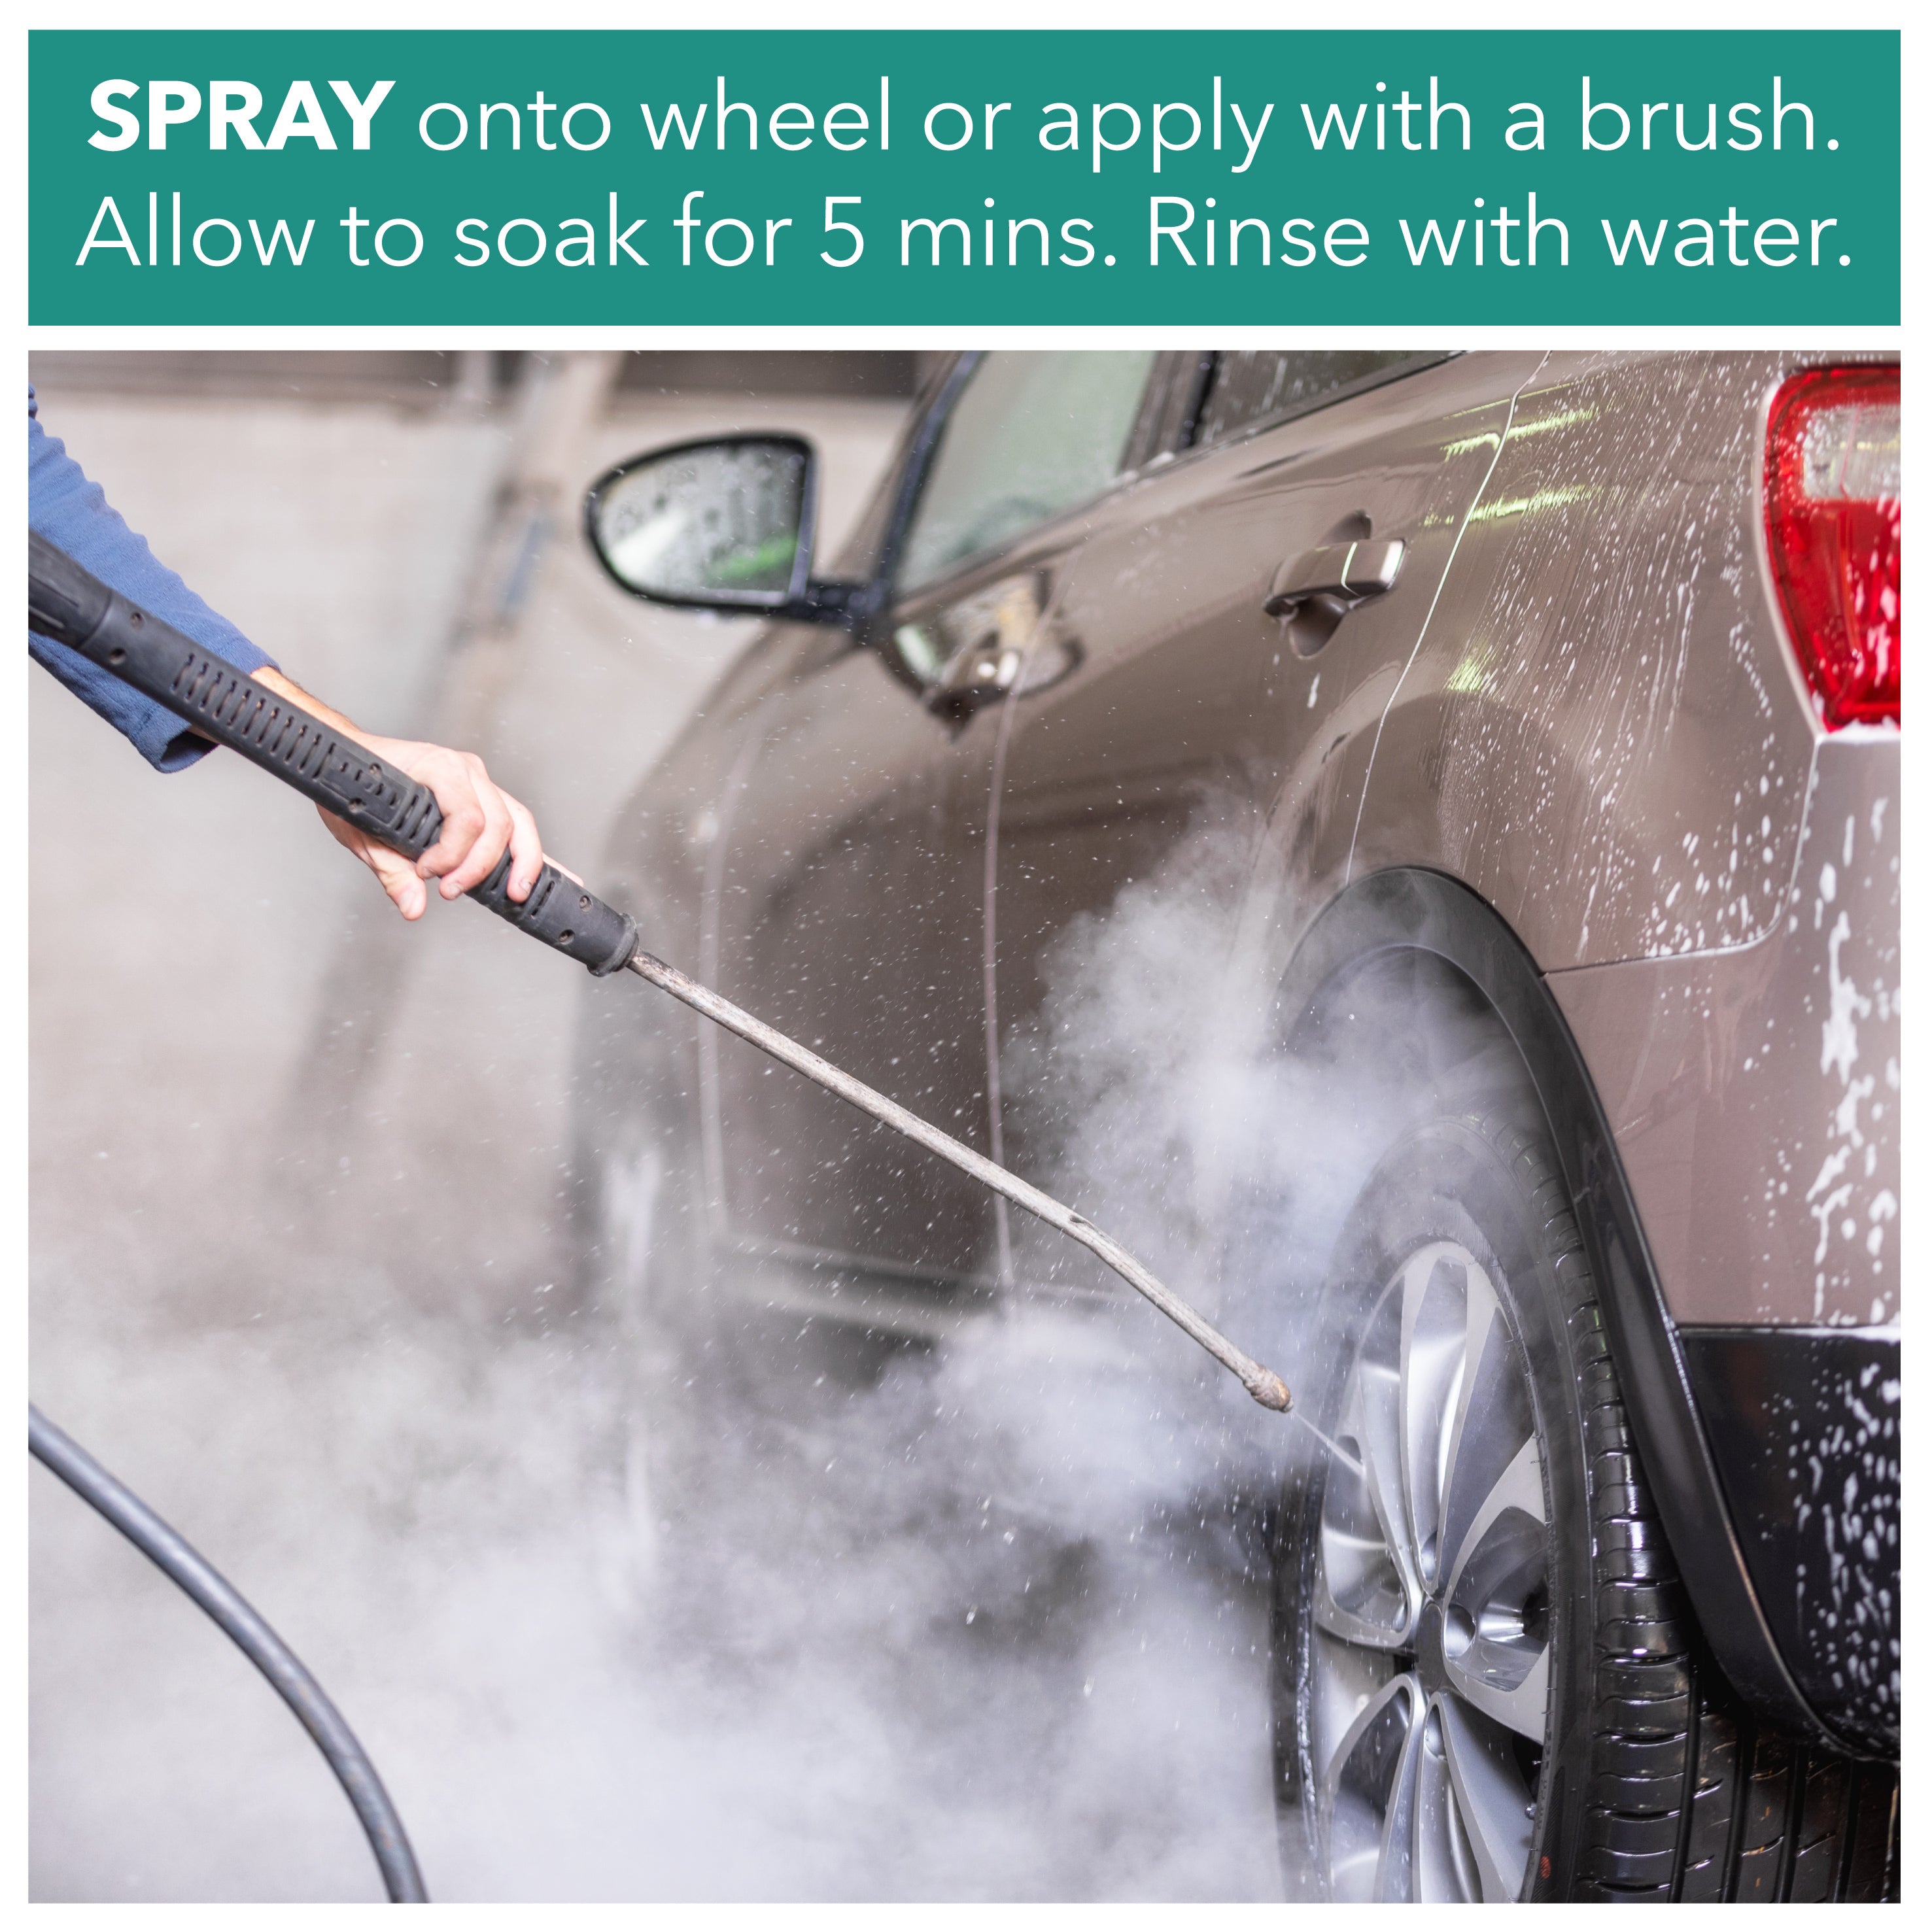 spray onto wheel or apply with brush, allow to soak for 5 mins, rinse with water